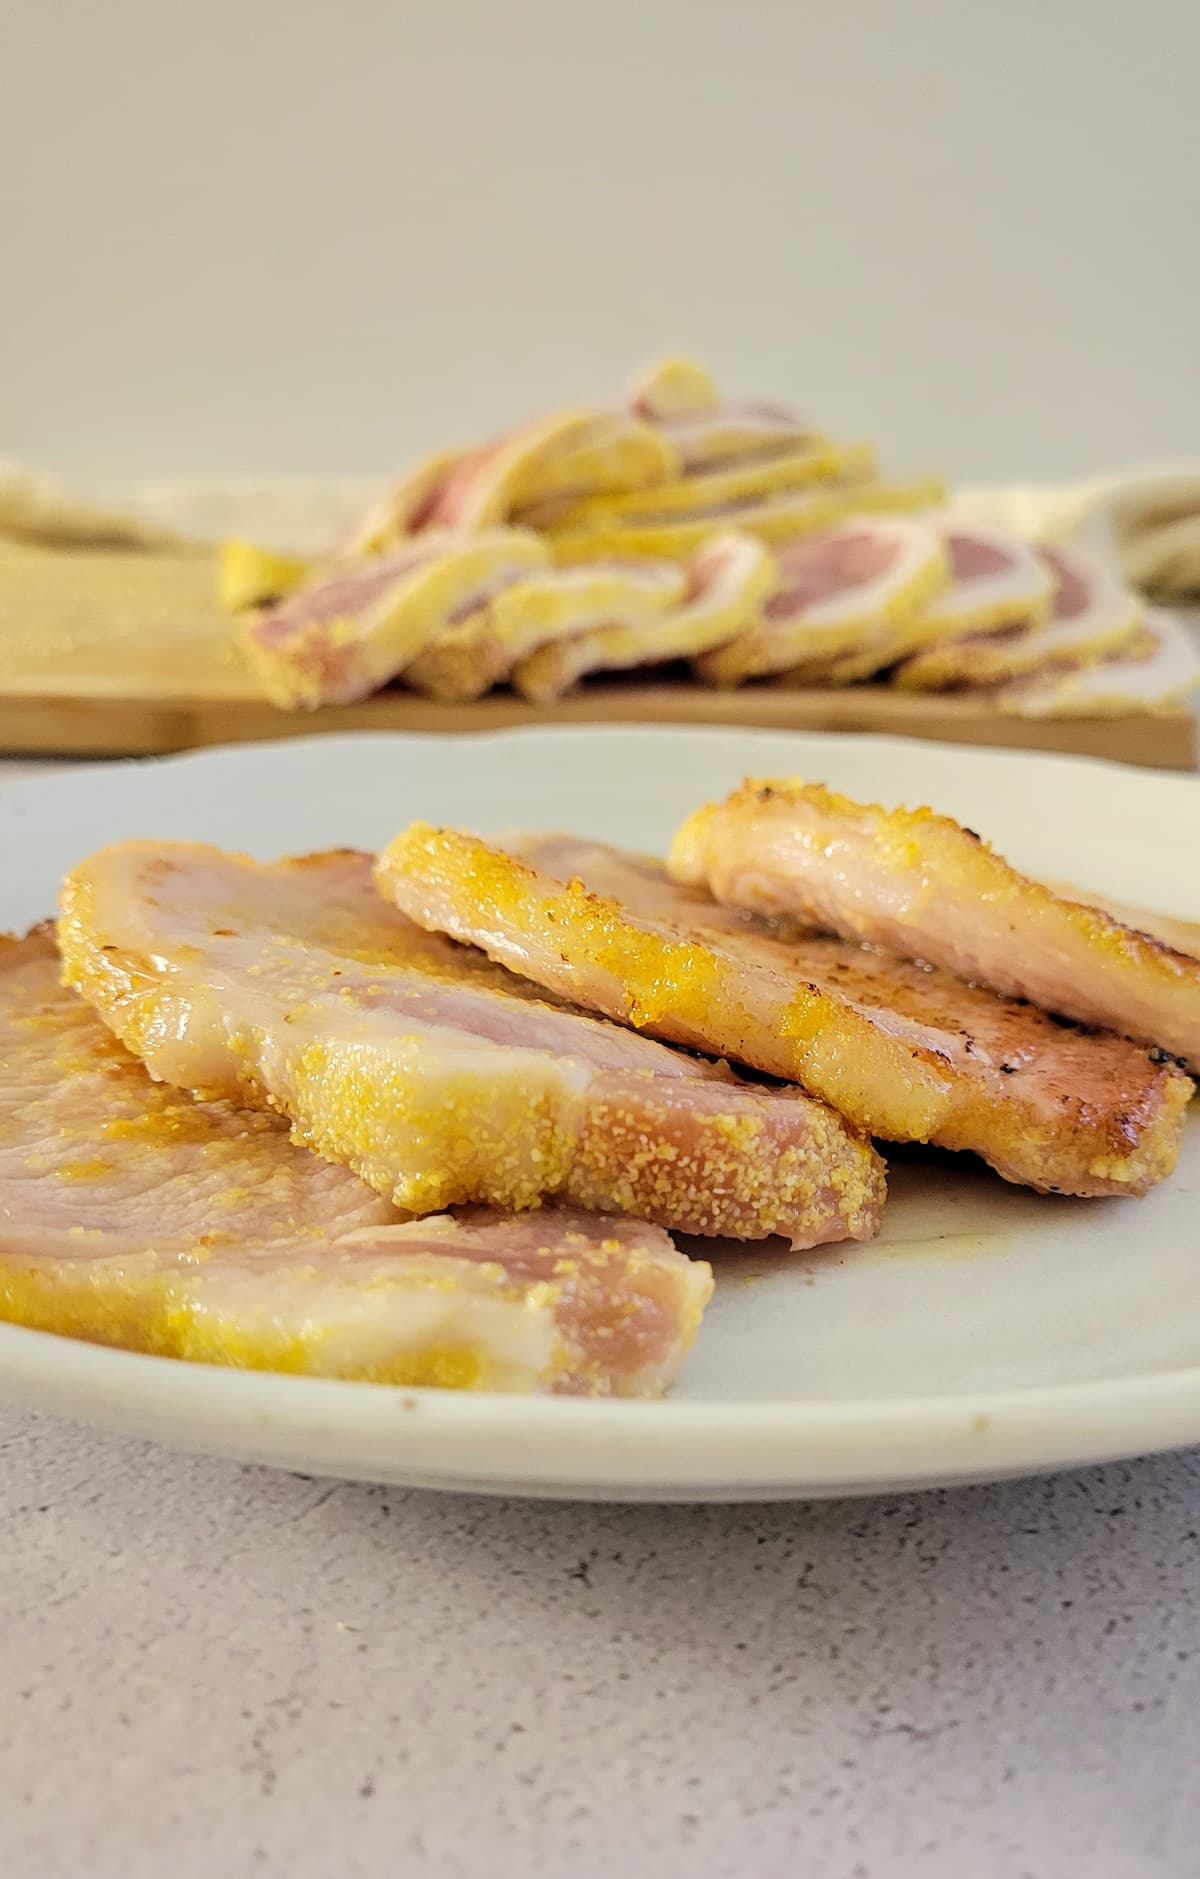 4 slices of cooked peameal bacon on a plate, more stacked on a cutting board in the background